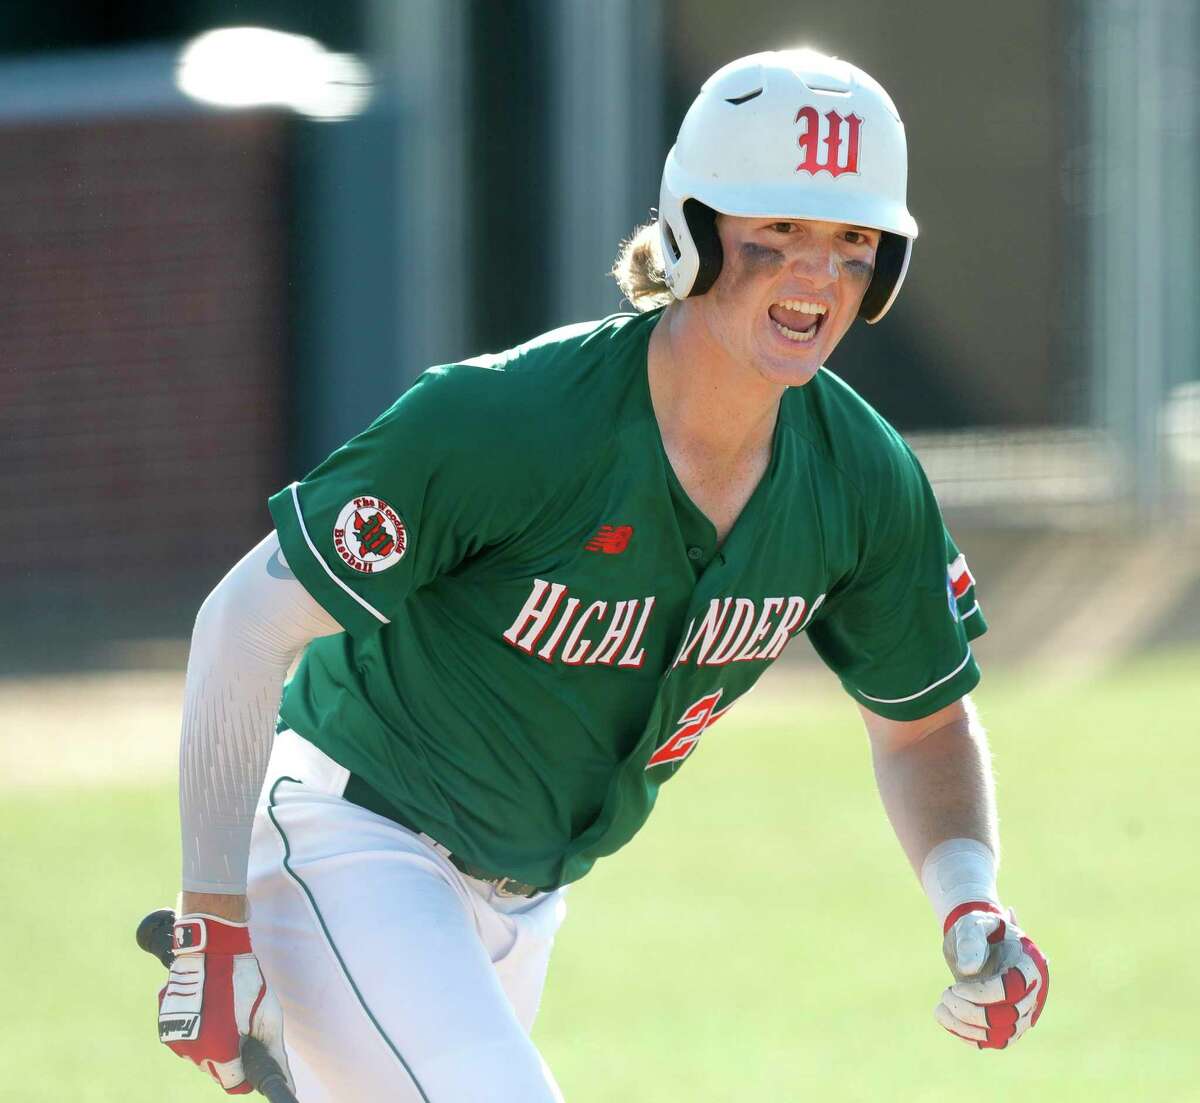 The Woodlands’ Gray Nooe, shown here in March, had a two-run hit during the Highlanders bi-district win over Aldine Davis on Saturday.